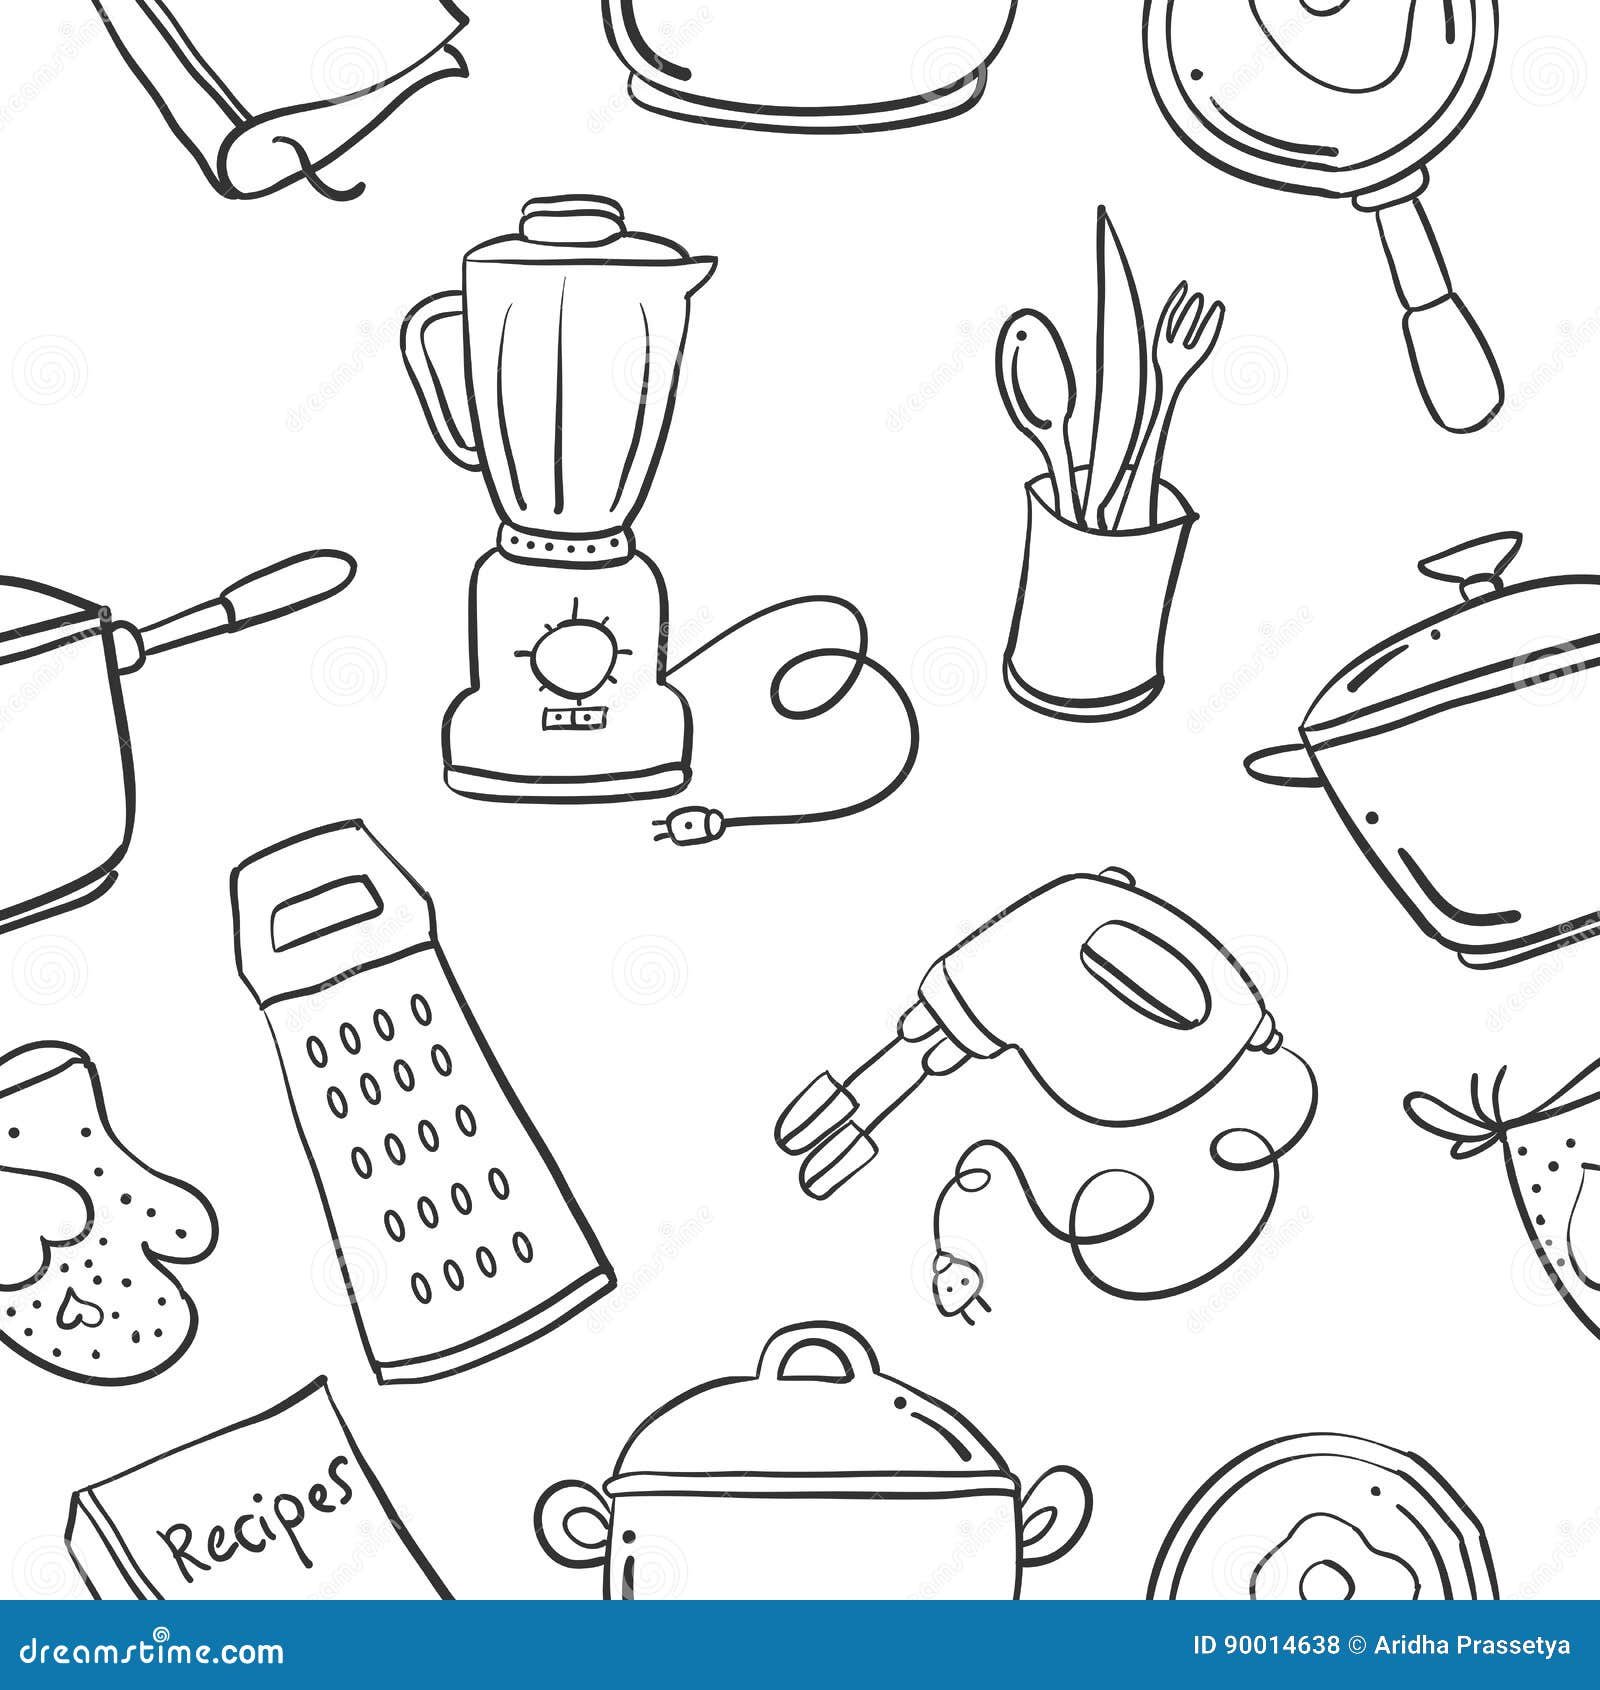 Line Drawings Kitchen Stock Photos and Images - 123RF